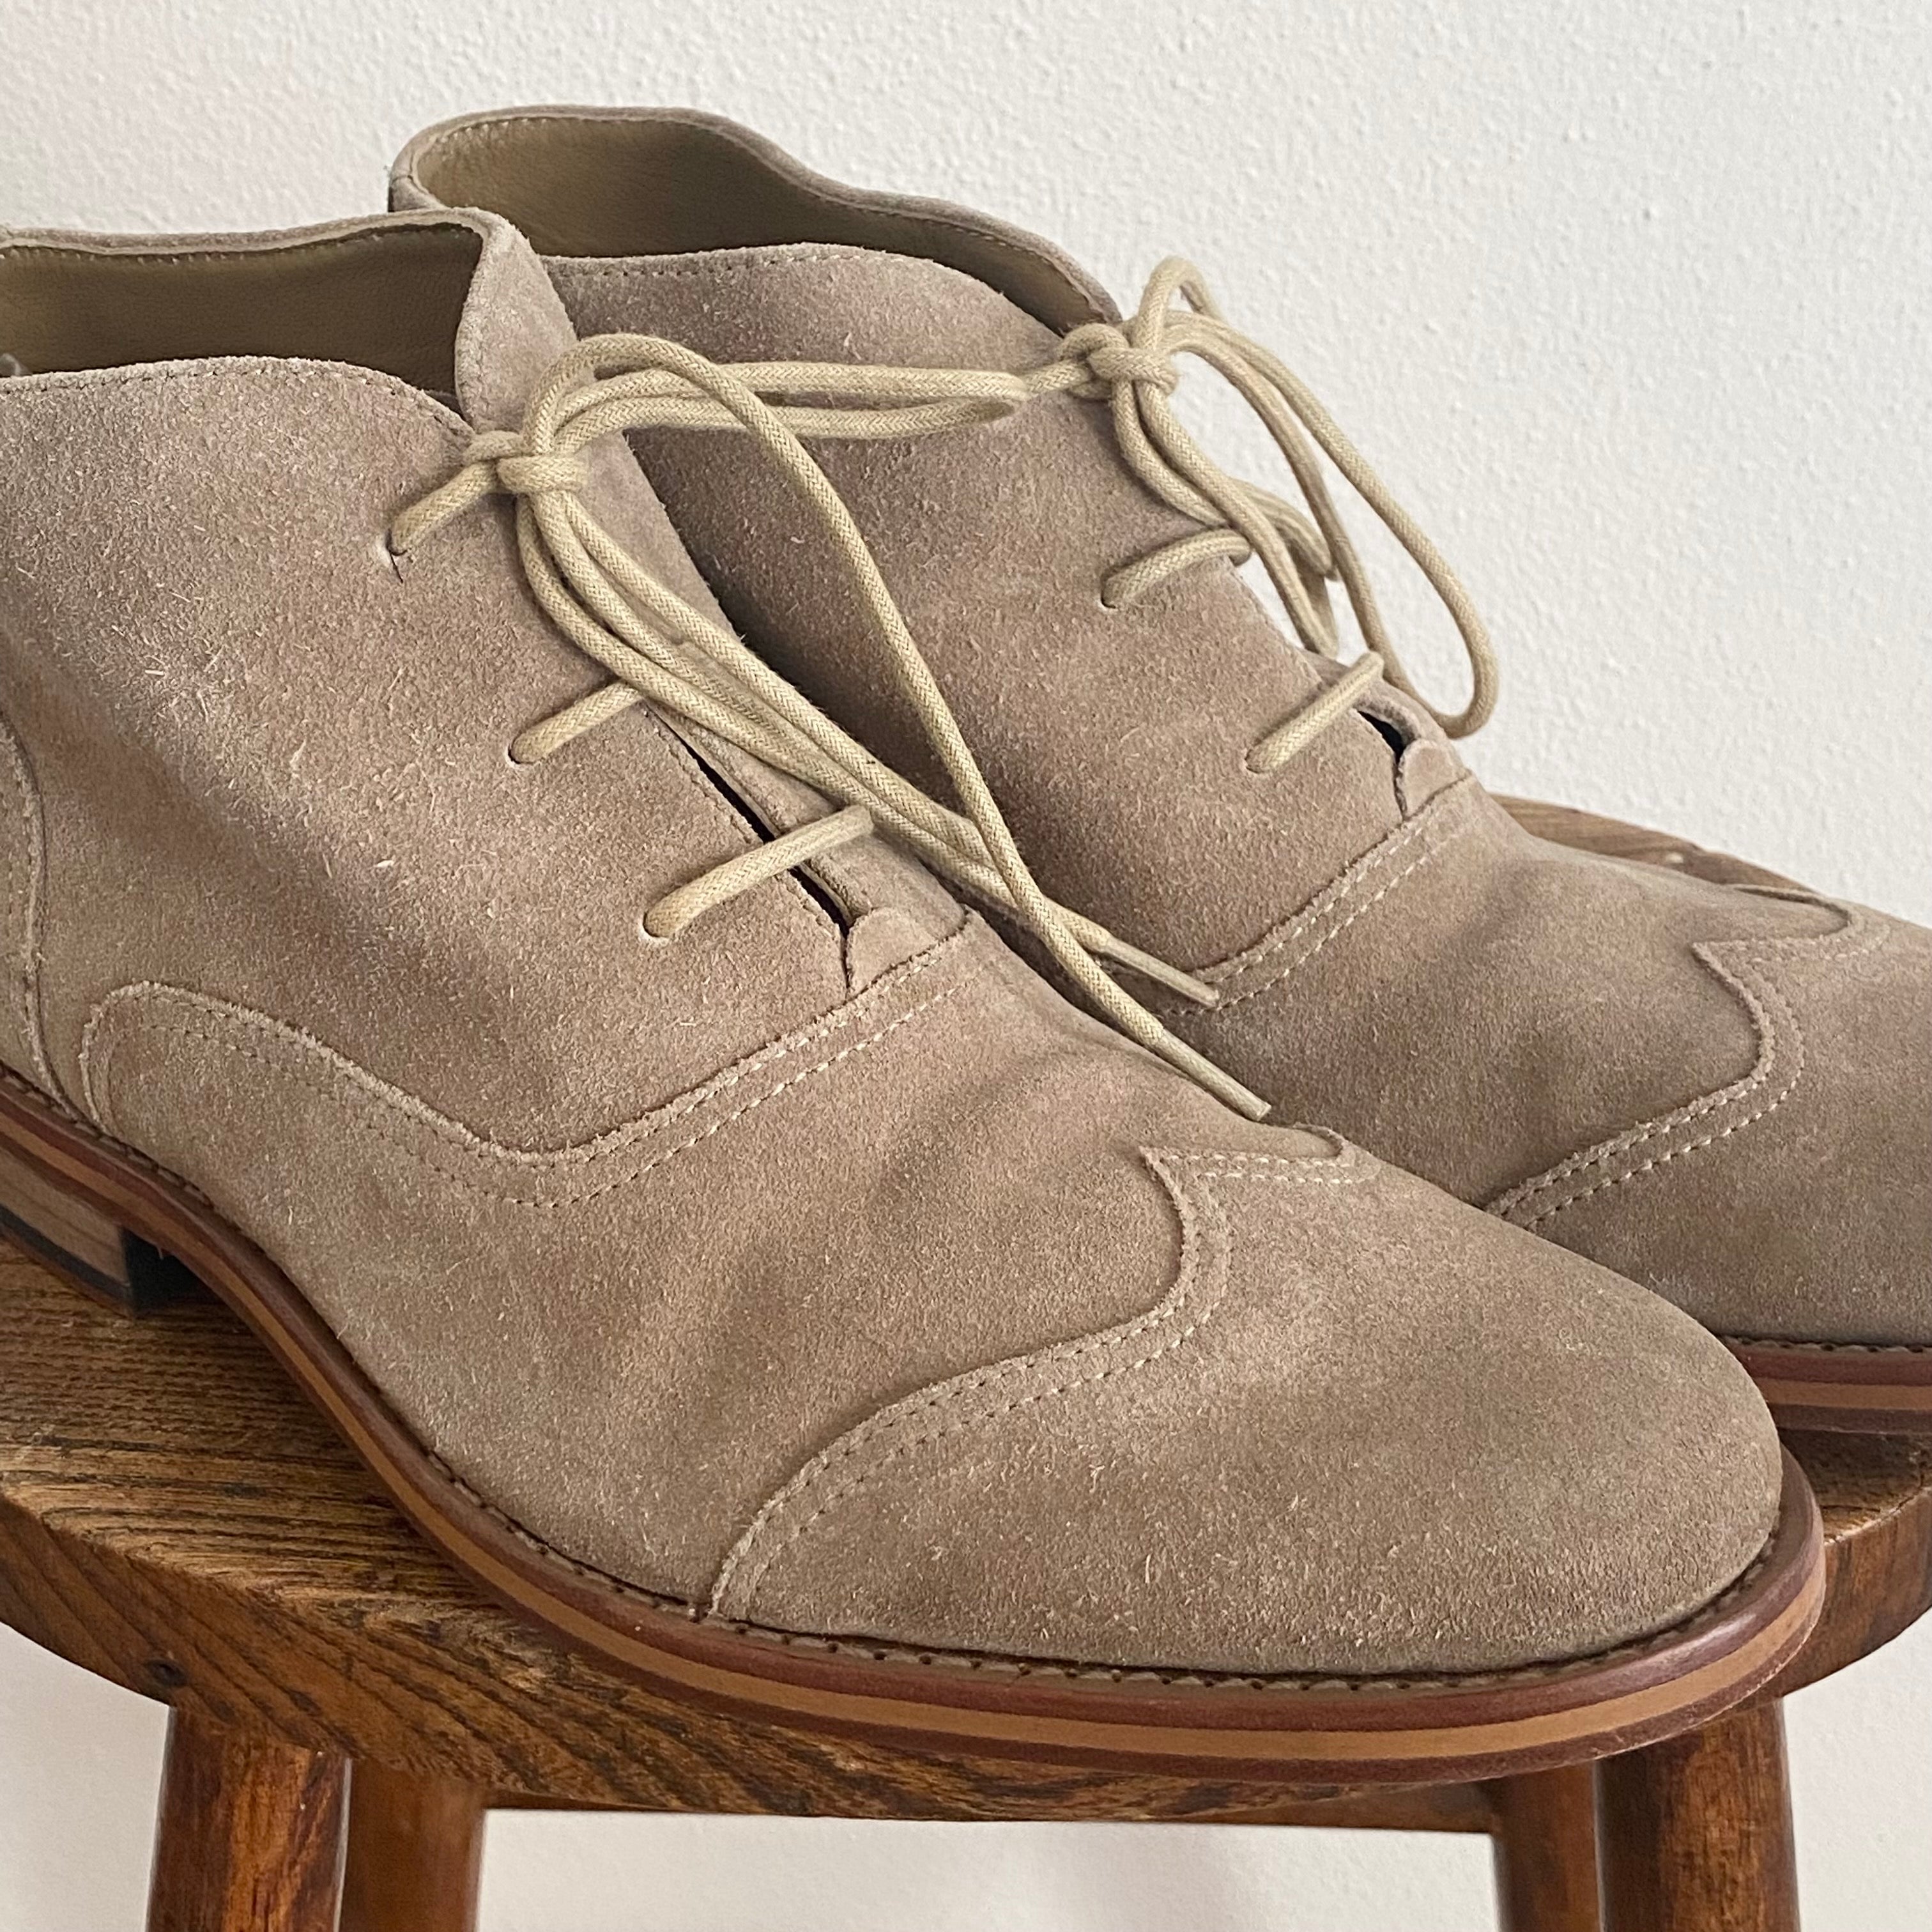 Suede Wing Tip Boots - 9DUS/42EU/9,5UK